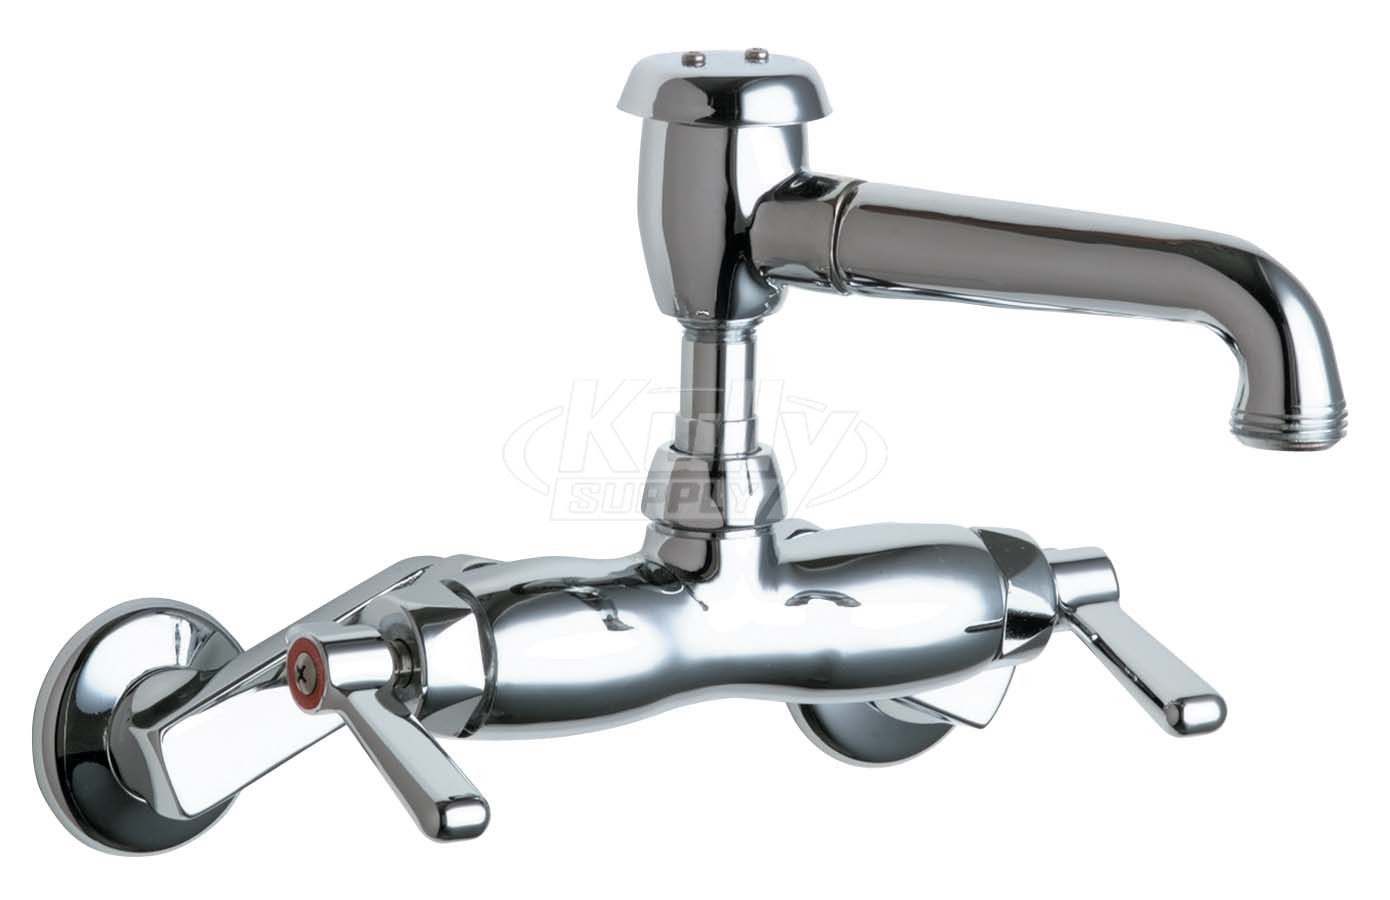 Chicago 886-CP Service Sink Faucet